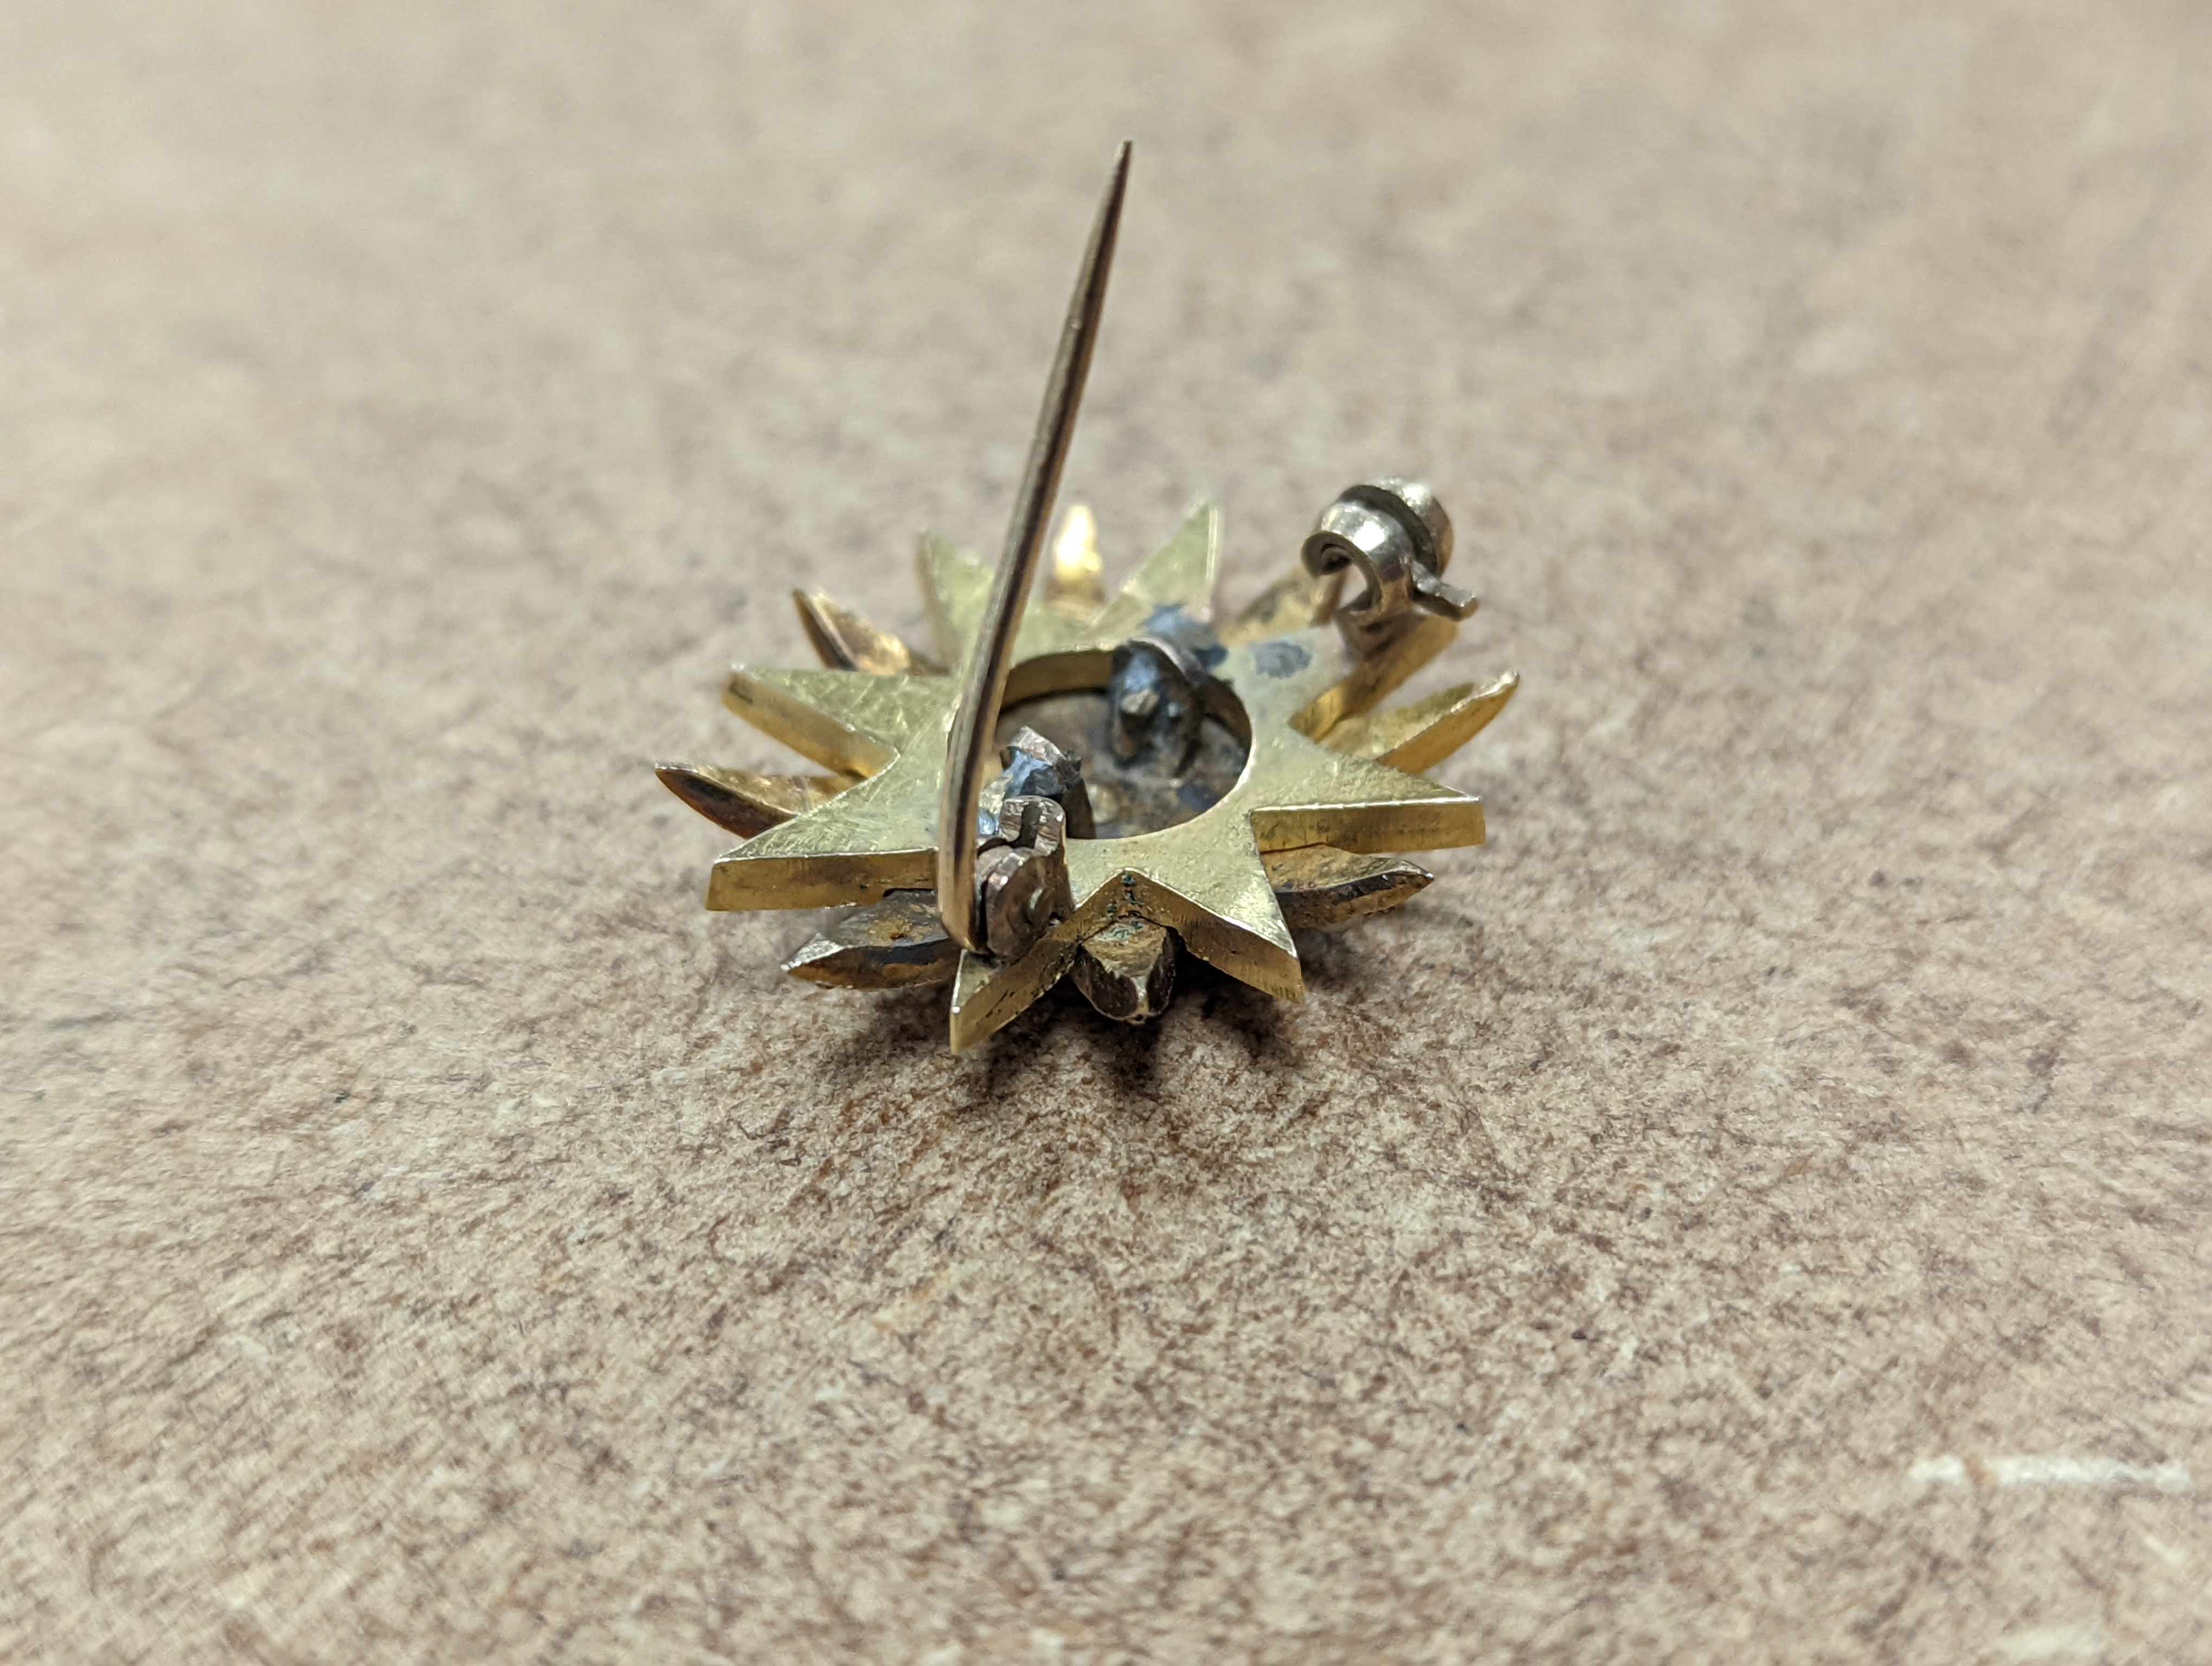 An Edwardian yellow metal, graduated split pearl and single stone diamond set starburst brooch(adapted?), 24mm, gross weight 6.5 grams.